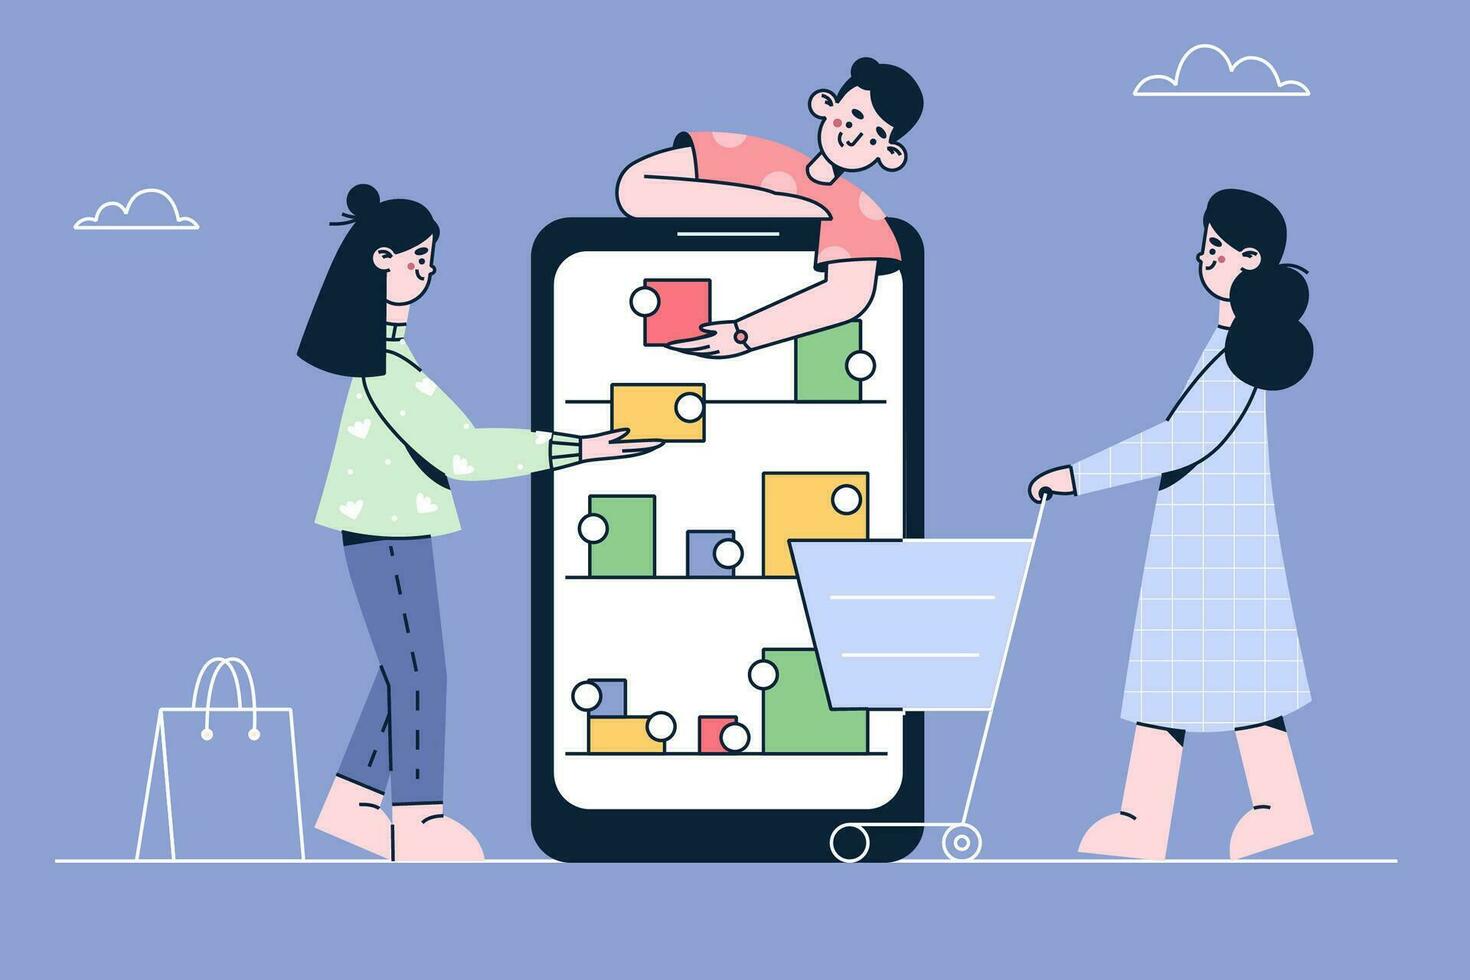 Online shopping and orders in internet concept. Young people man and women customers choosing items and adding to cart online during shopping on smartphone screen vector illustration